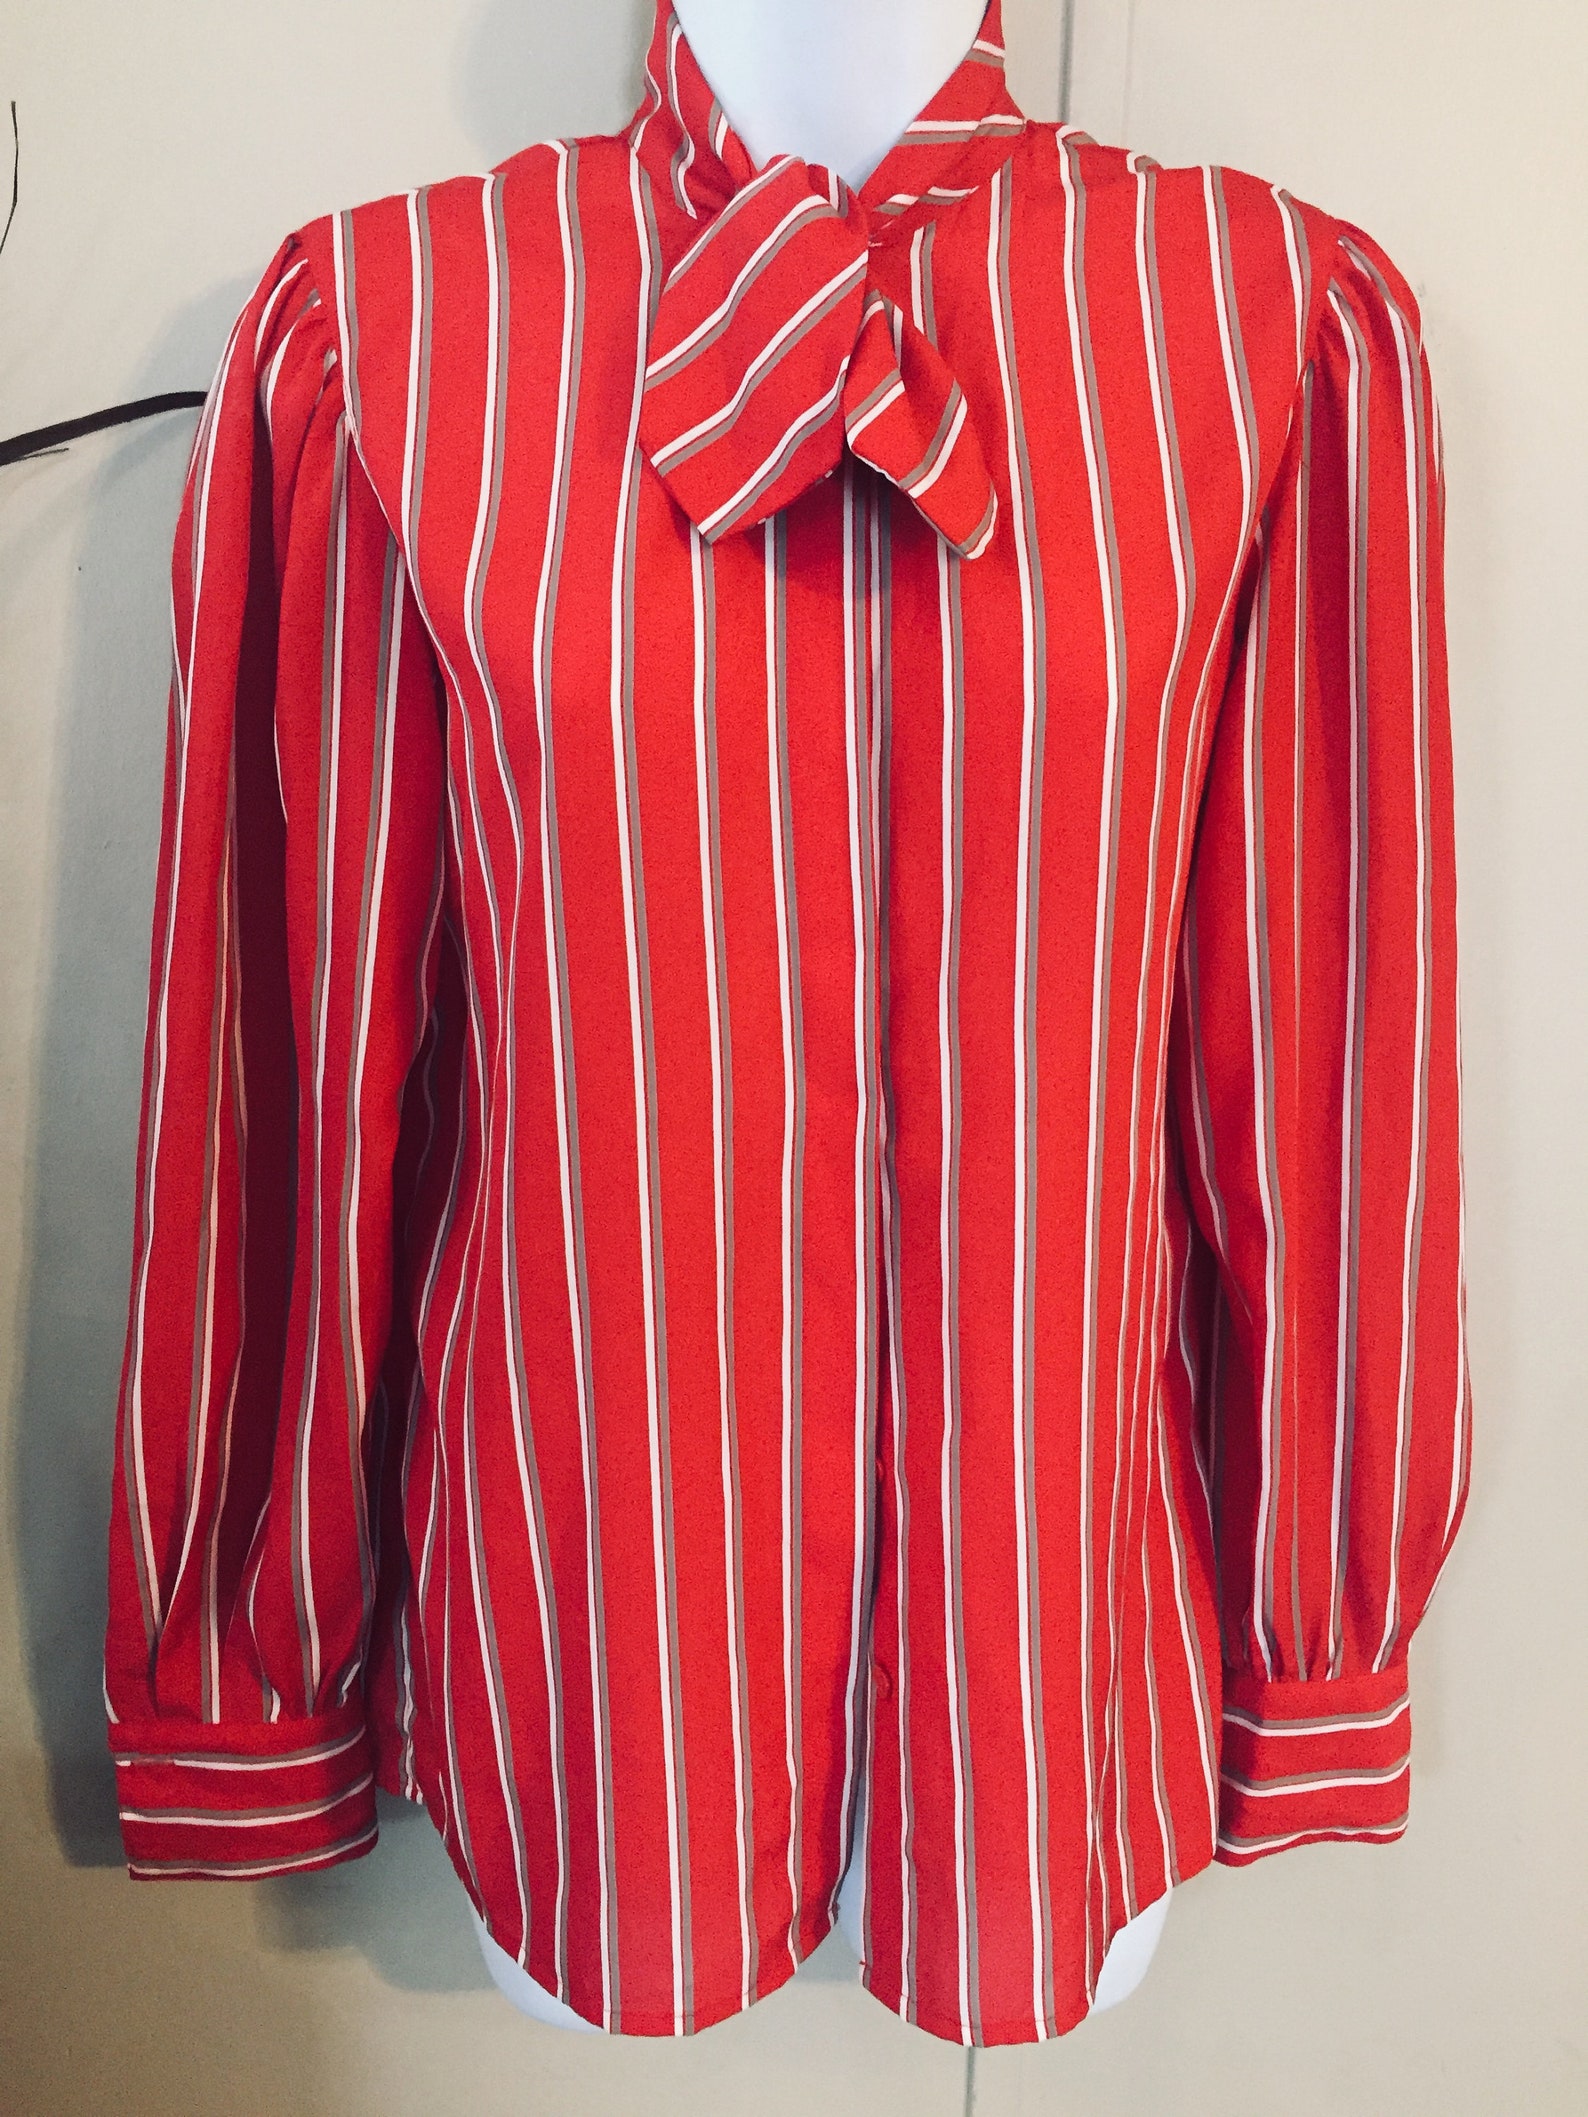 Vintage Jones New York red white and tan striped blouse | Etsy